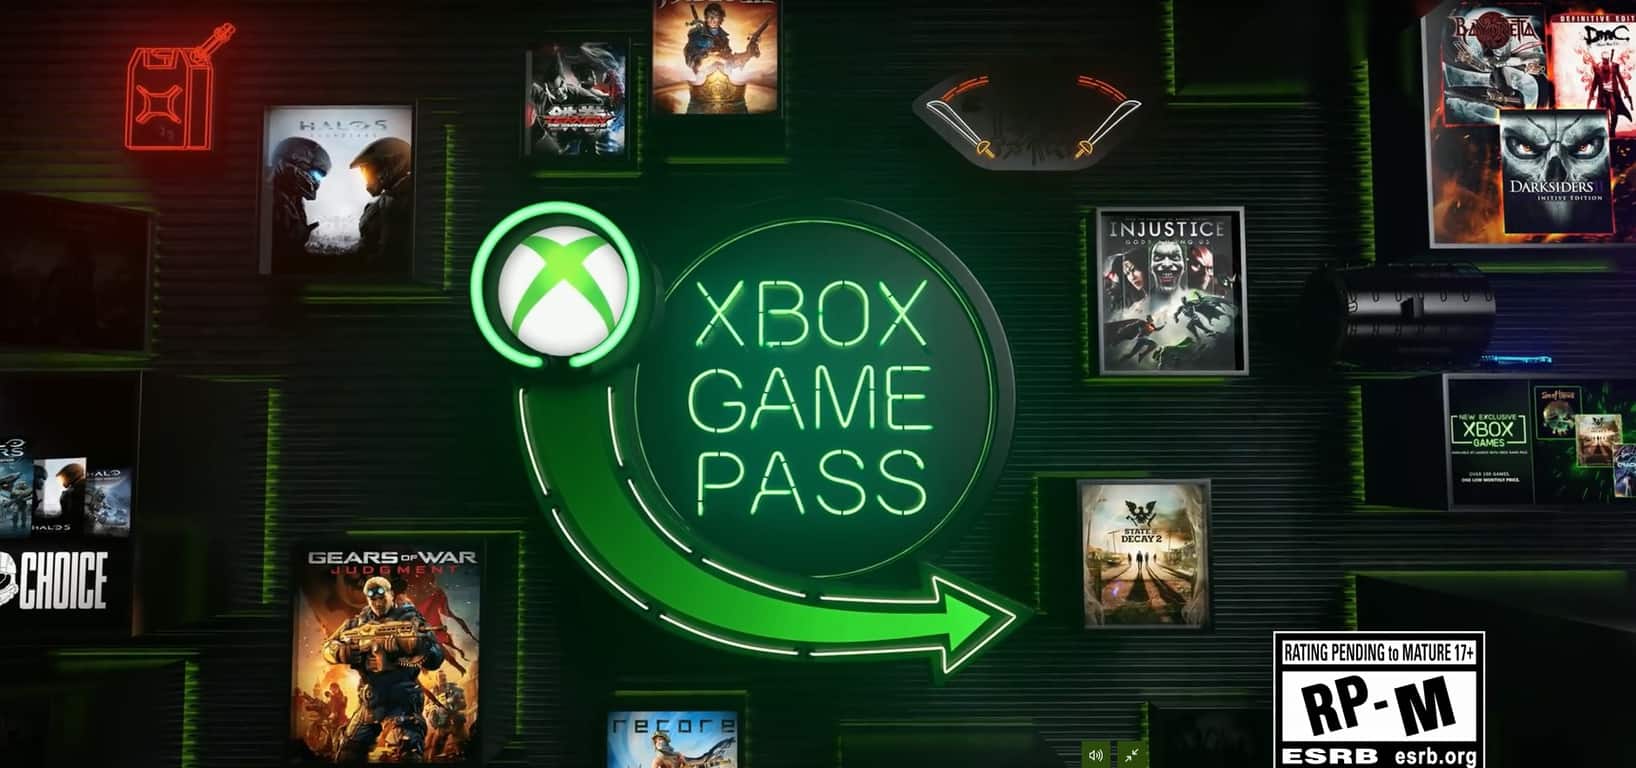 Deal: Get six months of Xbox Game Pass for the price of three ($29.99) on Amazon - OnMSFT.com - April 2, 2019